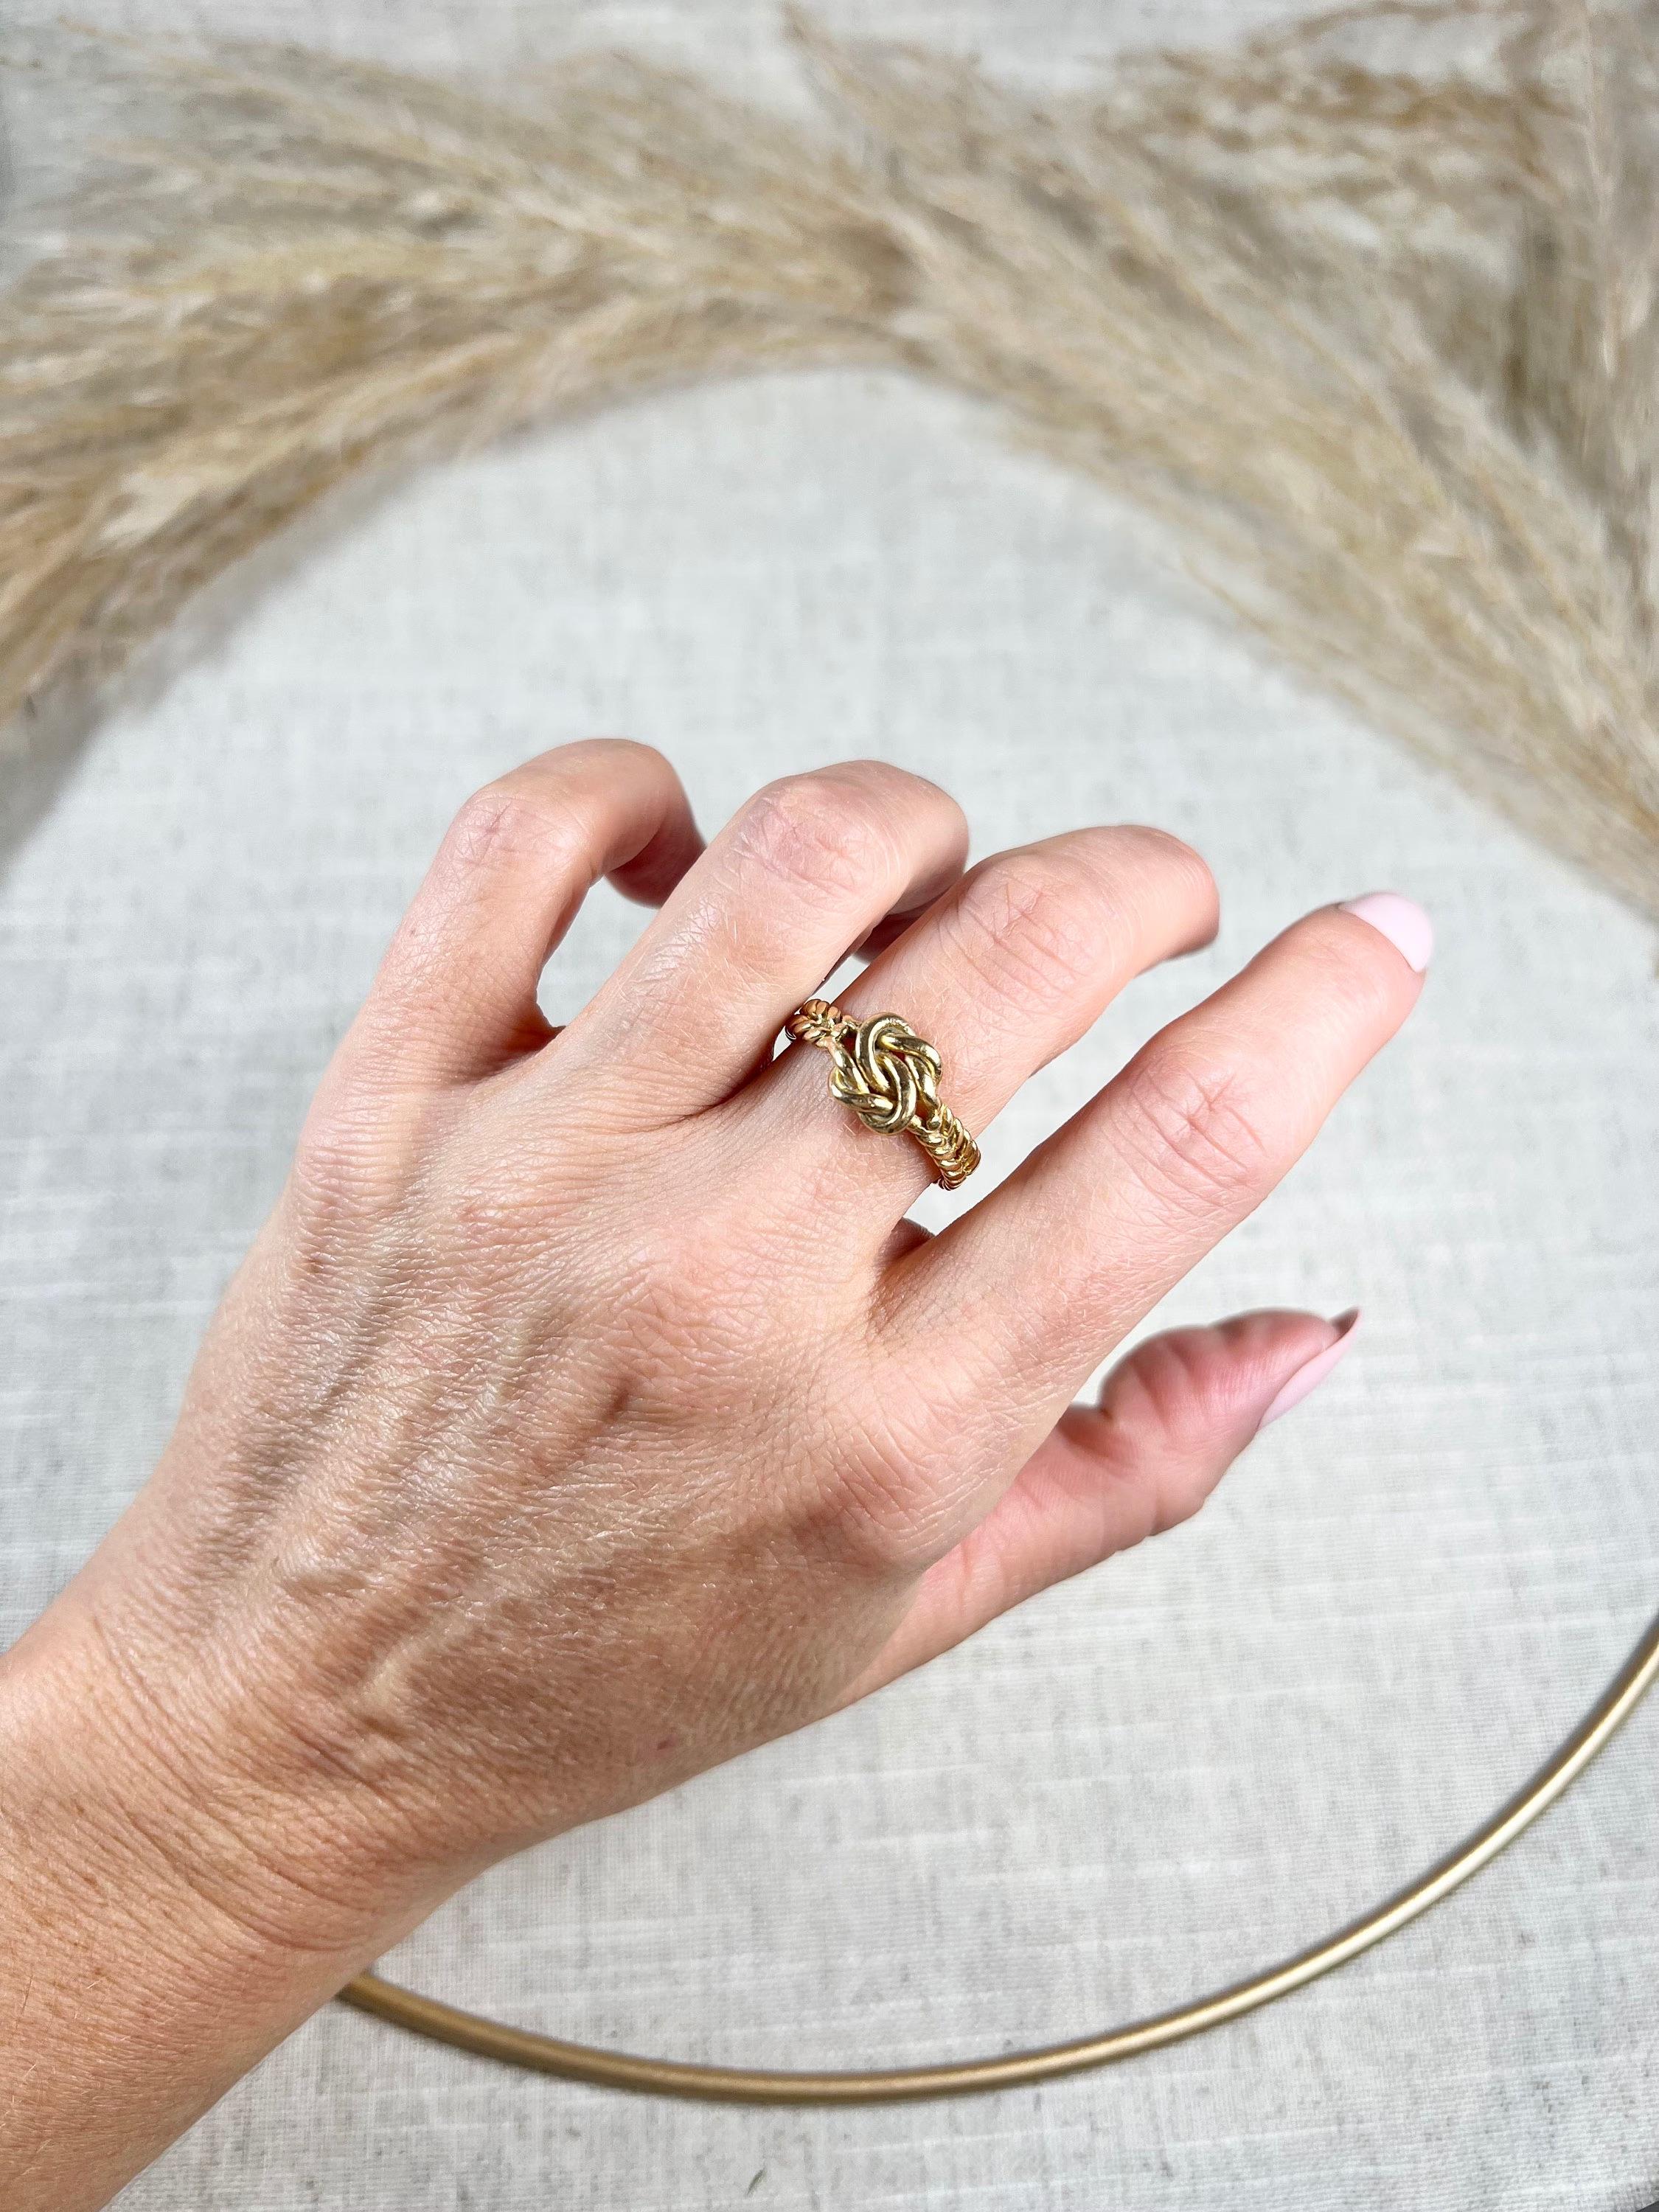 Antique Knot Ring 

18ct Gold Tagged

Circa 1900

This exquisite Edwardian lovers knot ring is made of 18ct gold and features a beautifully crafted plaited/braided gold band. The intricate design of the band creates an elegant and timeless look,